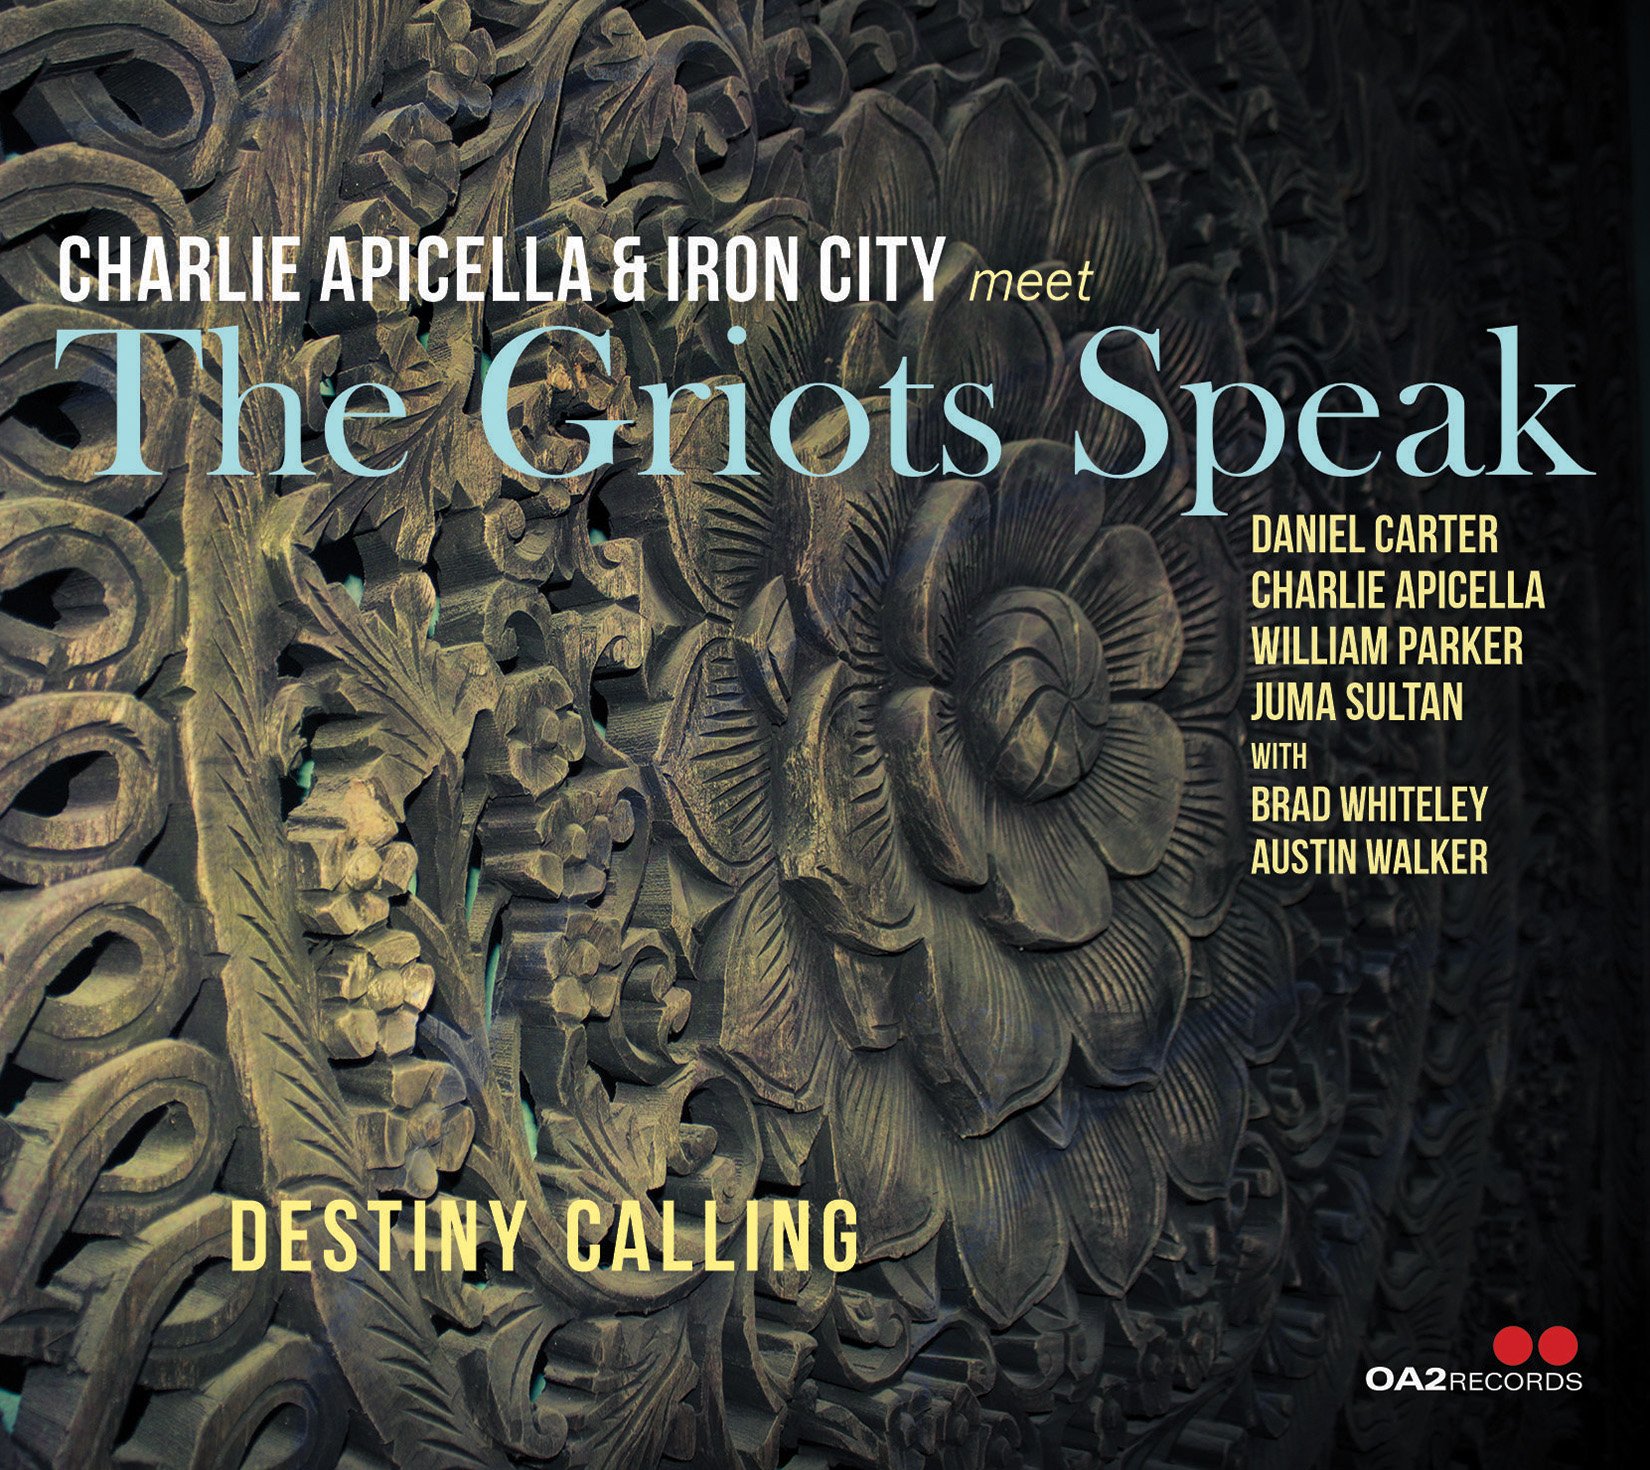 Griots — Charlie Apicella & Iron City